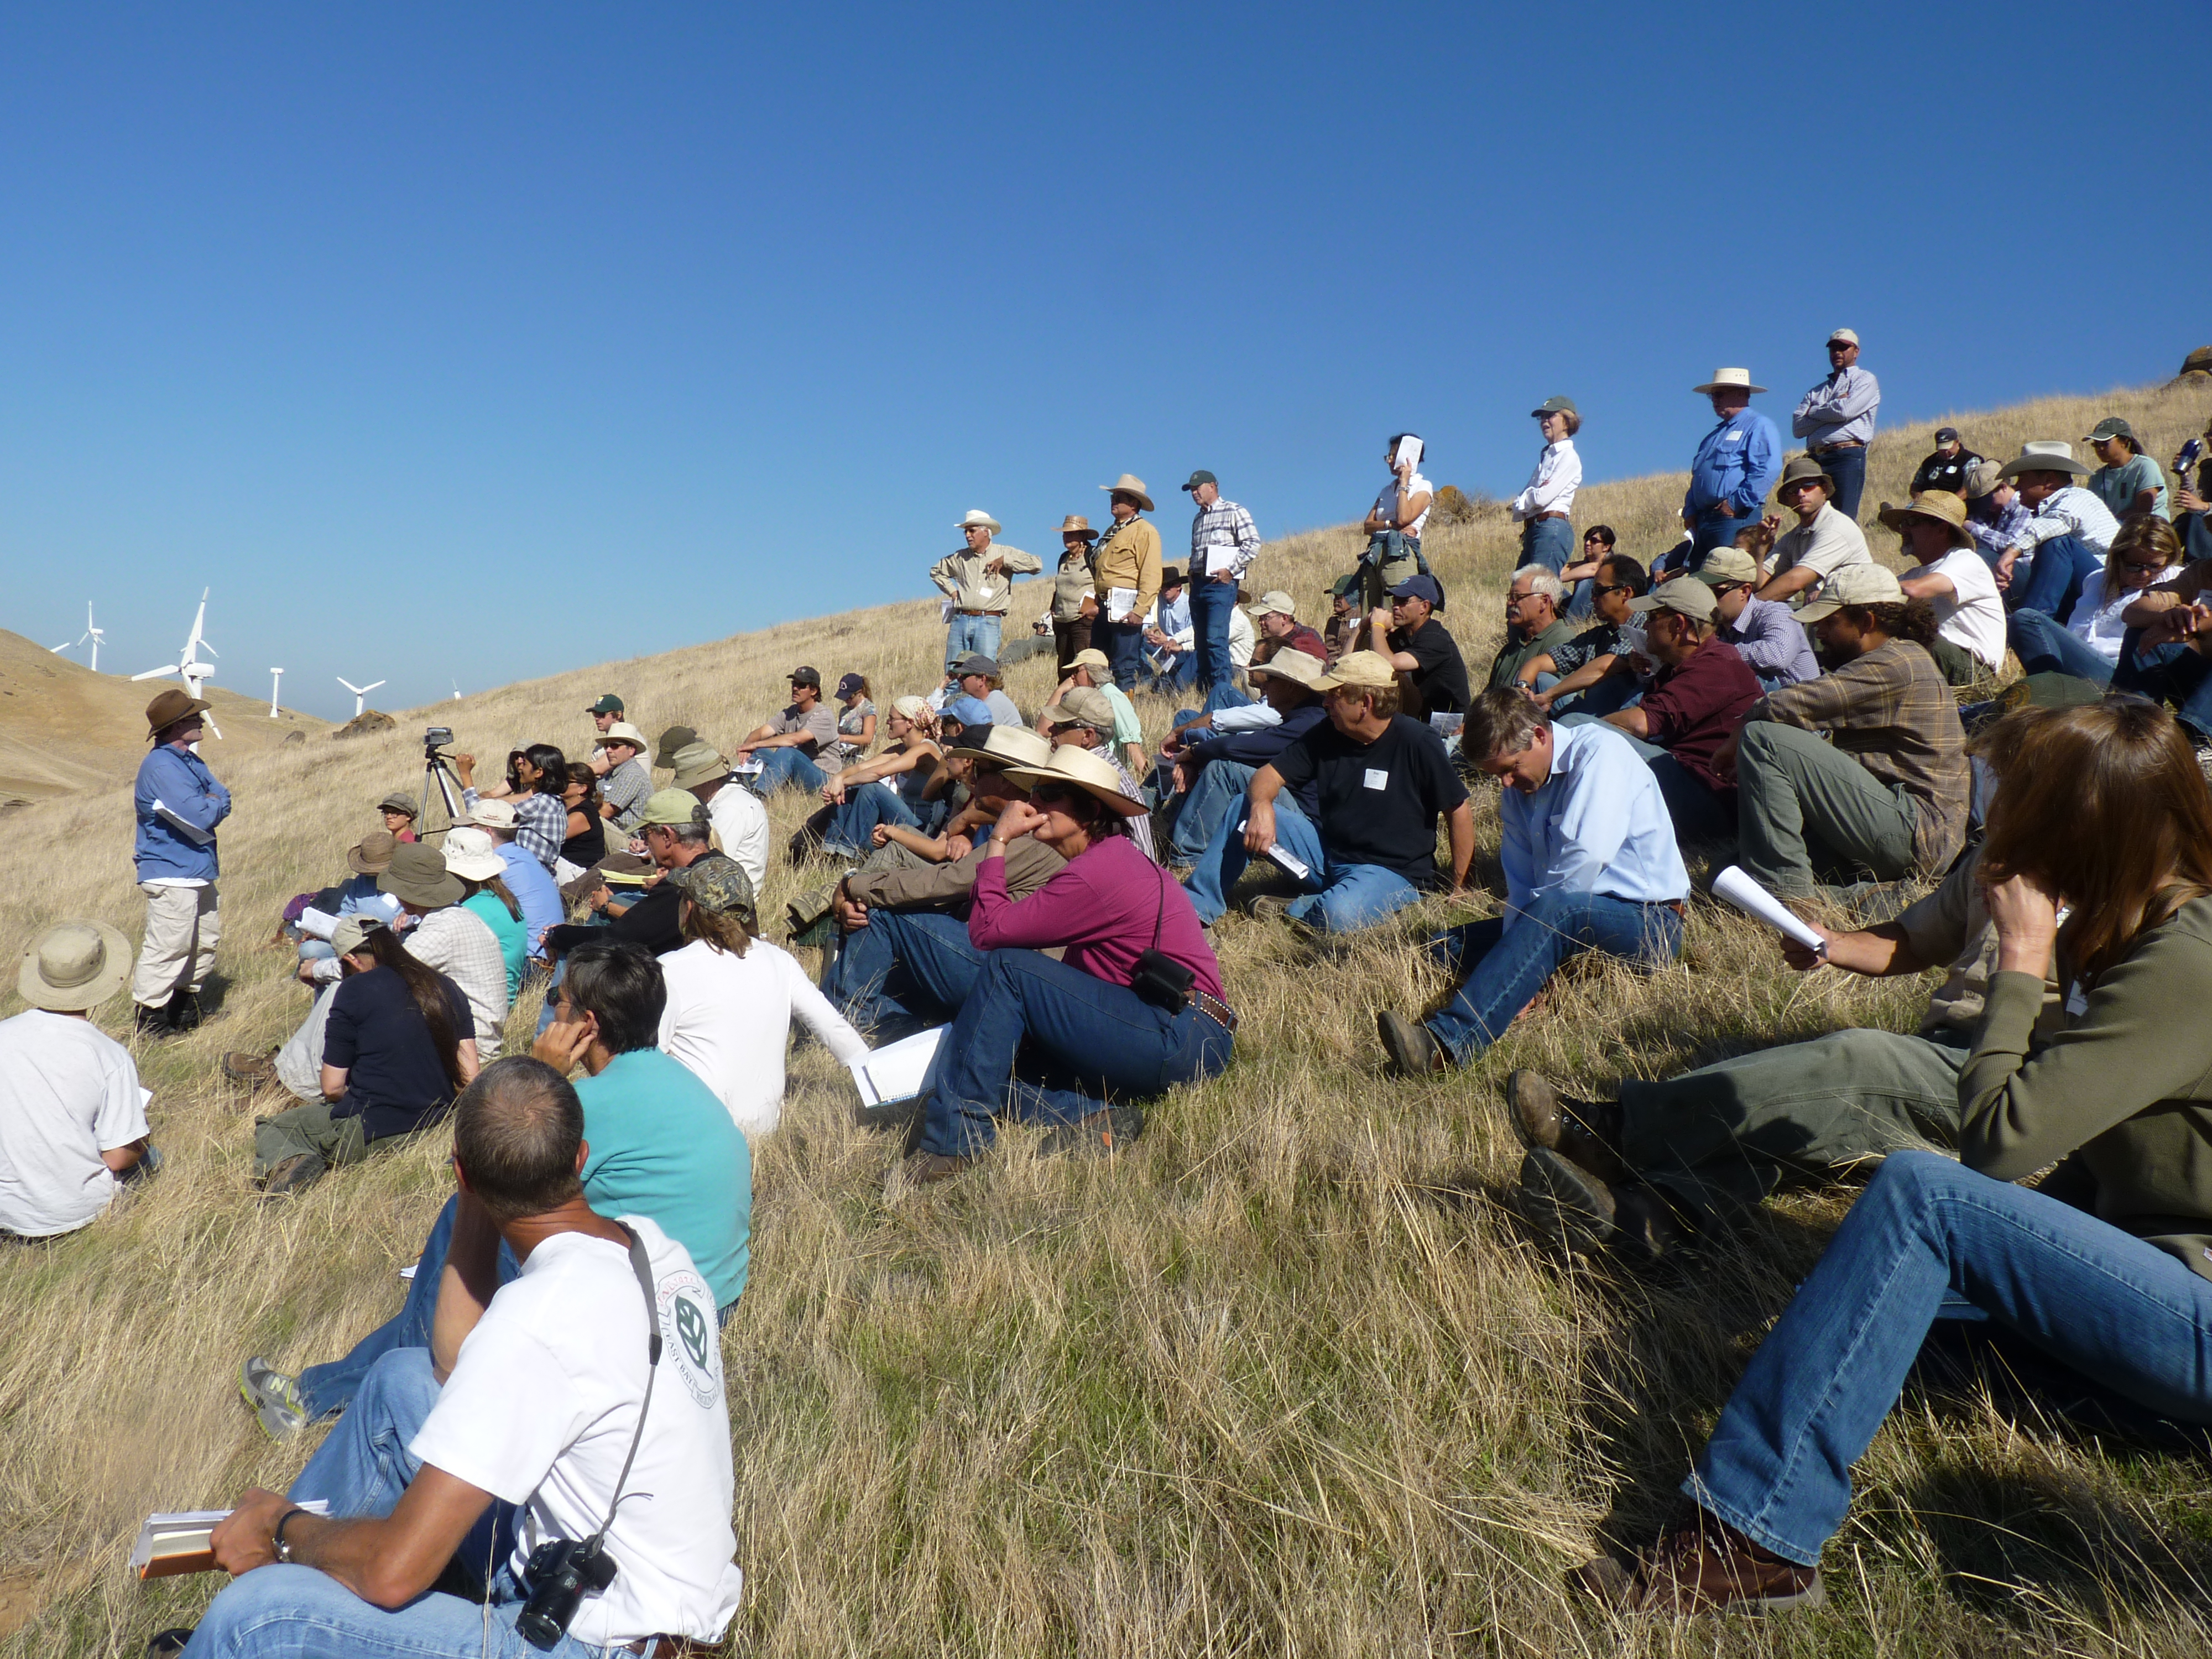 Ranching in Carnivore Country: Livestock Protection and Compensation Programs on the Central Coast - Central Coast Rangeland Coalition Fall 2017 Meeting program image